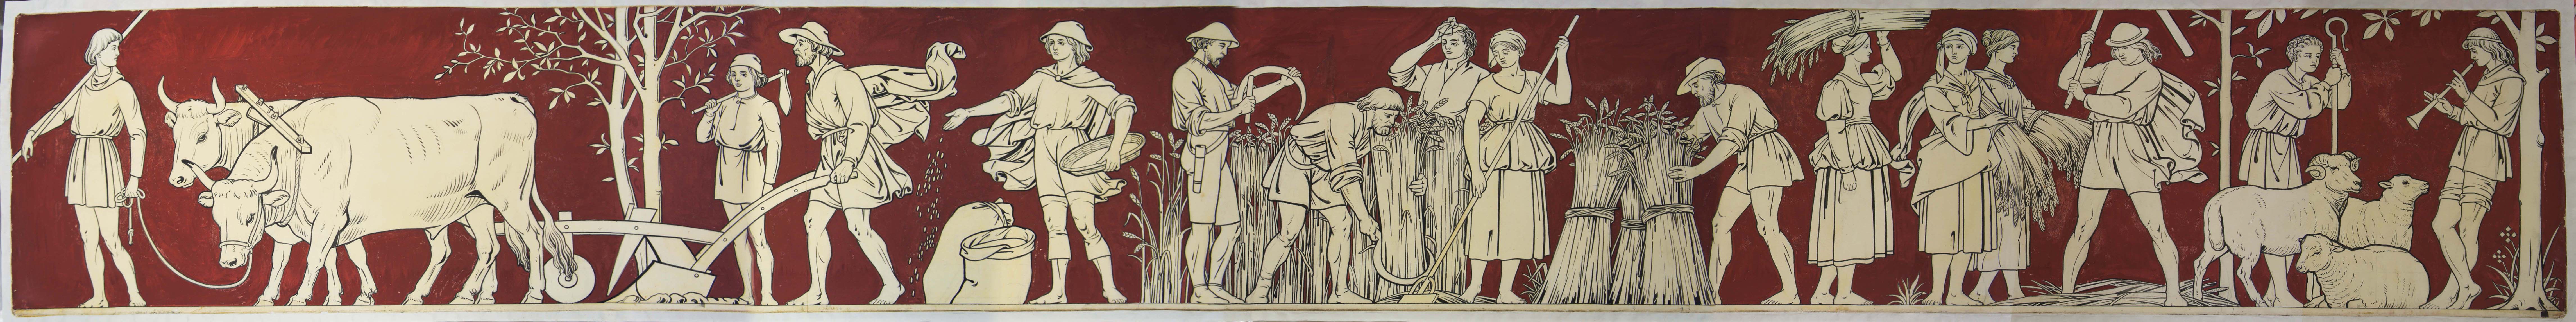 The original drawing of Agriculture by H. Stacy Marks. 